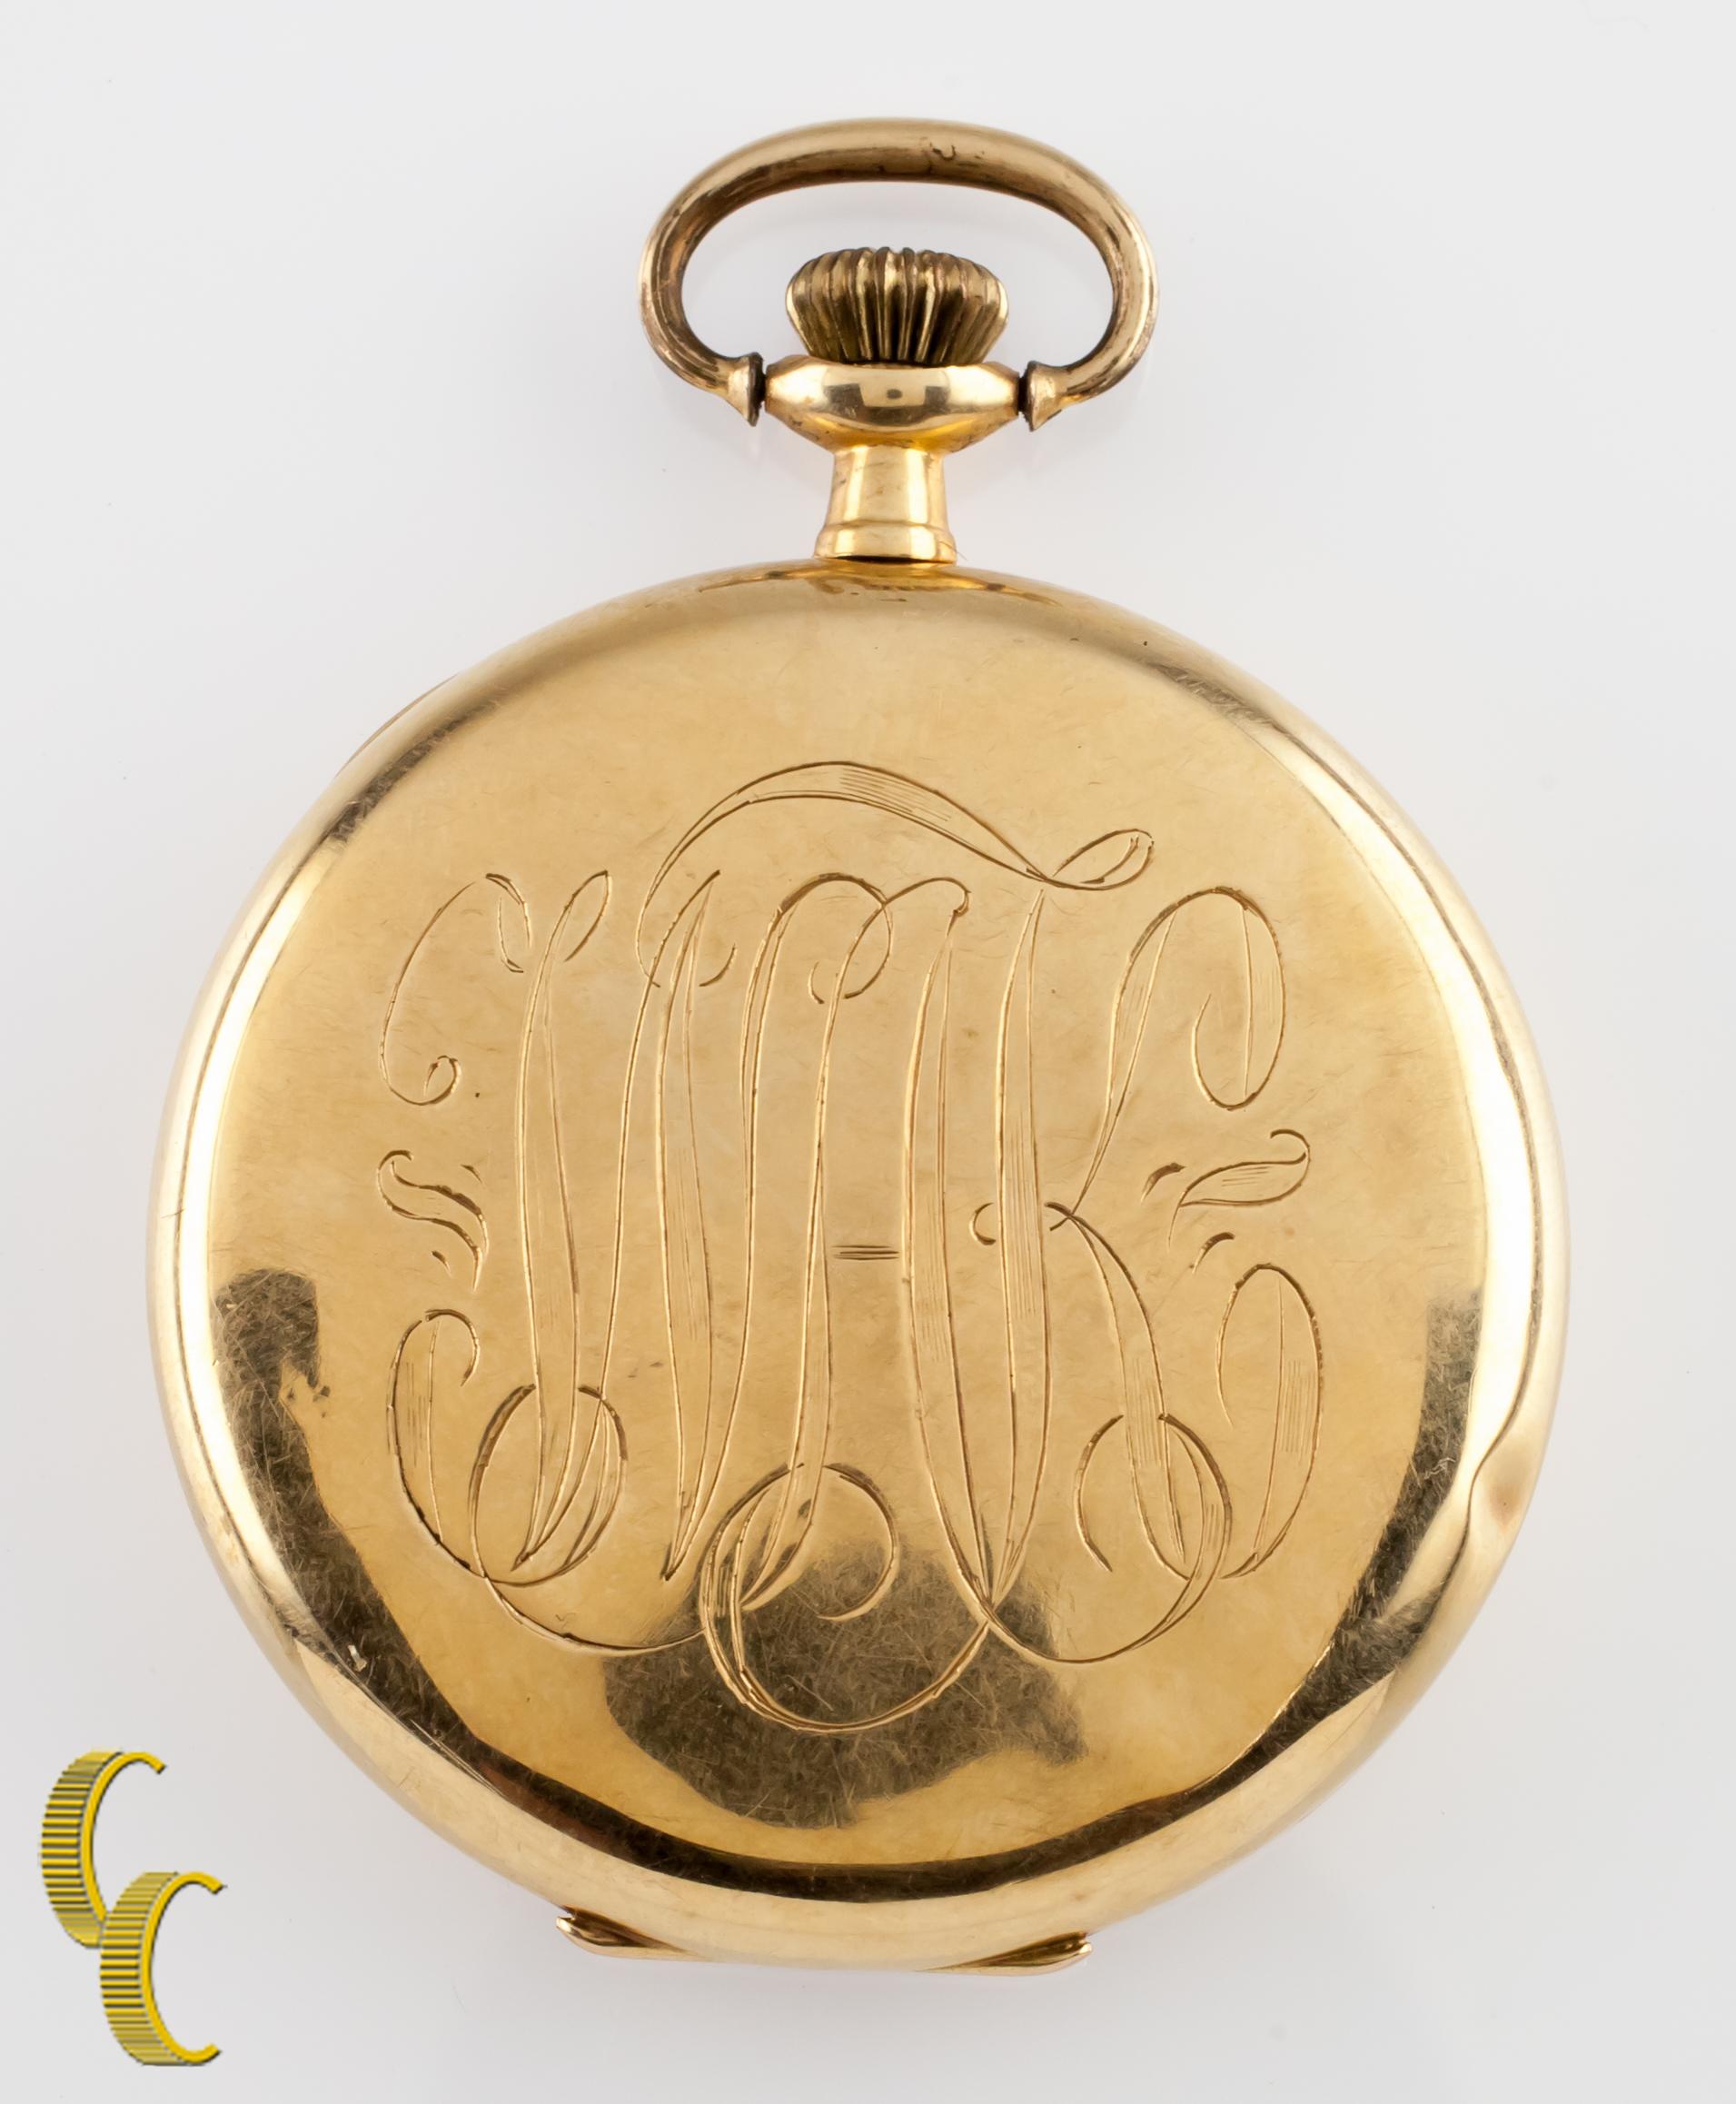 Beautiful Antique Hampden Pocket Watch w/ White Dial Including Blue Hands & Dedicated Second Dial
14K Yellow Gold Case w/ Intricate Hand-Etched Design on Case (Initials WAK)
Black Arabic Numerals
Case Serial # 9981042
21-Jewel Hampden Movement